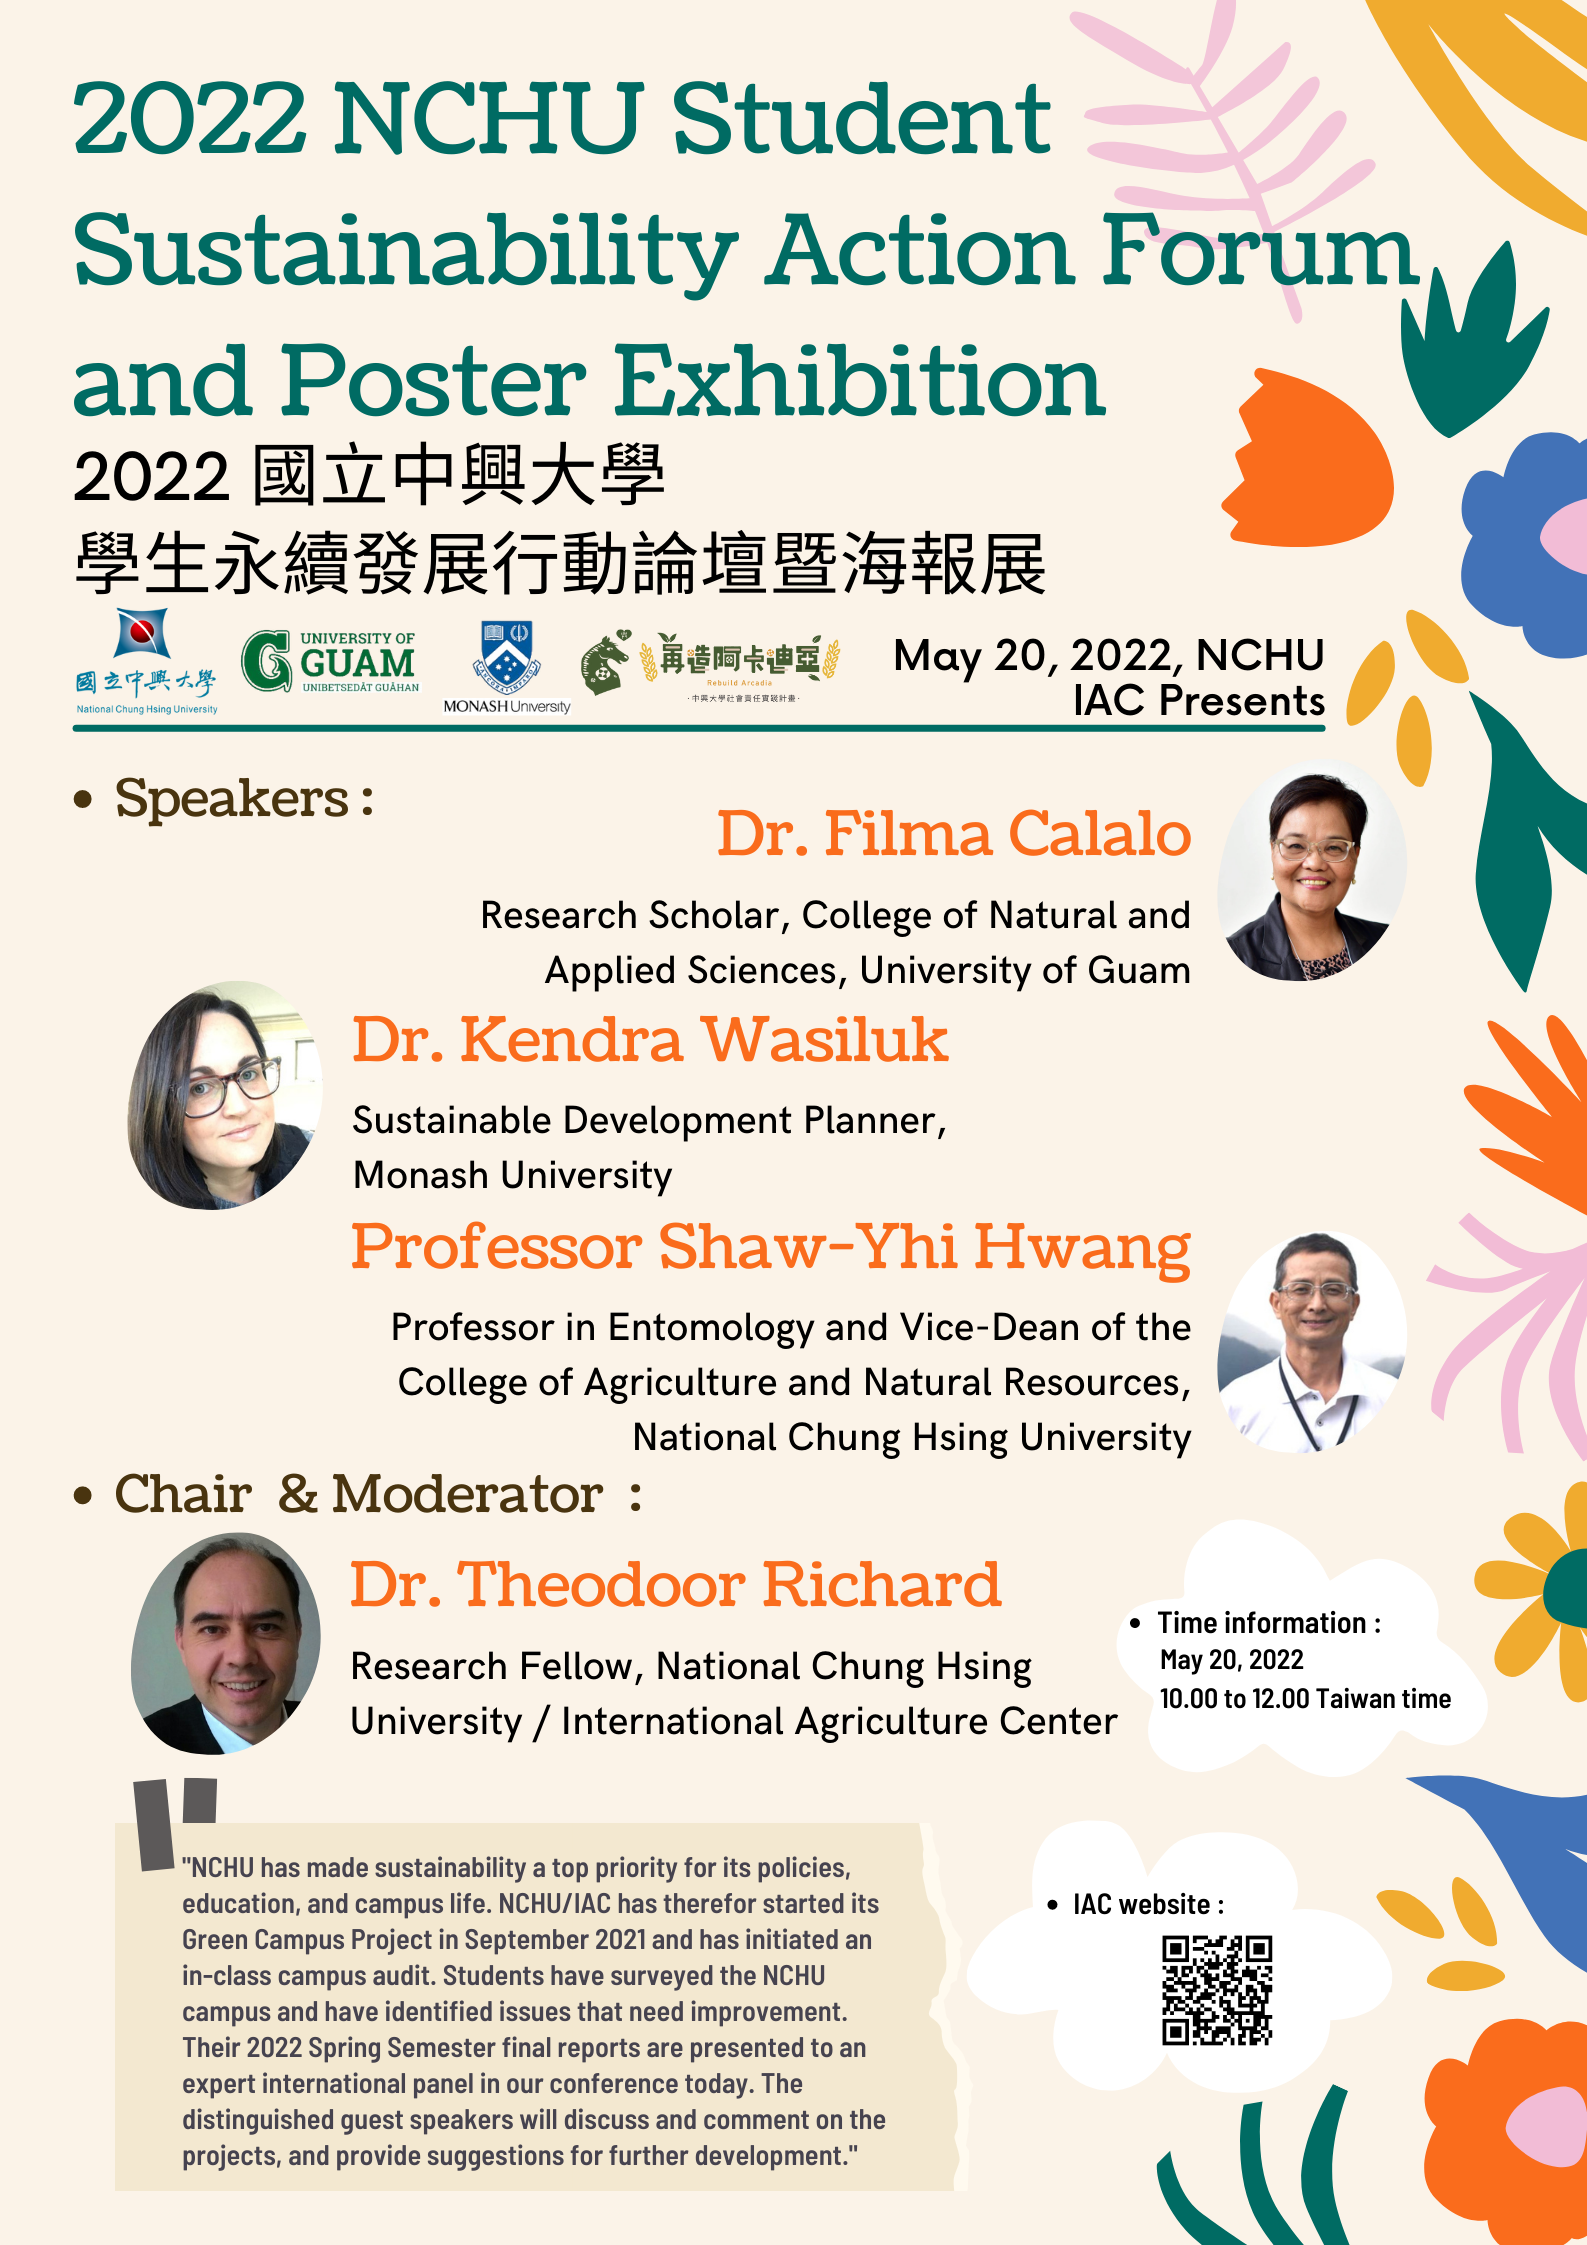 2022 NCHU Student Sustainability Action Forum and Poster Exhibition